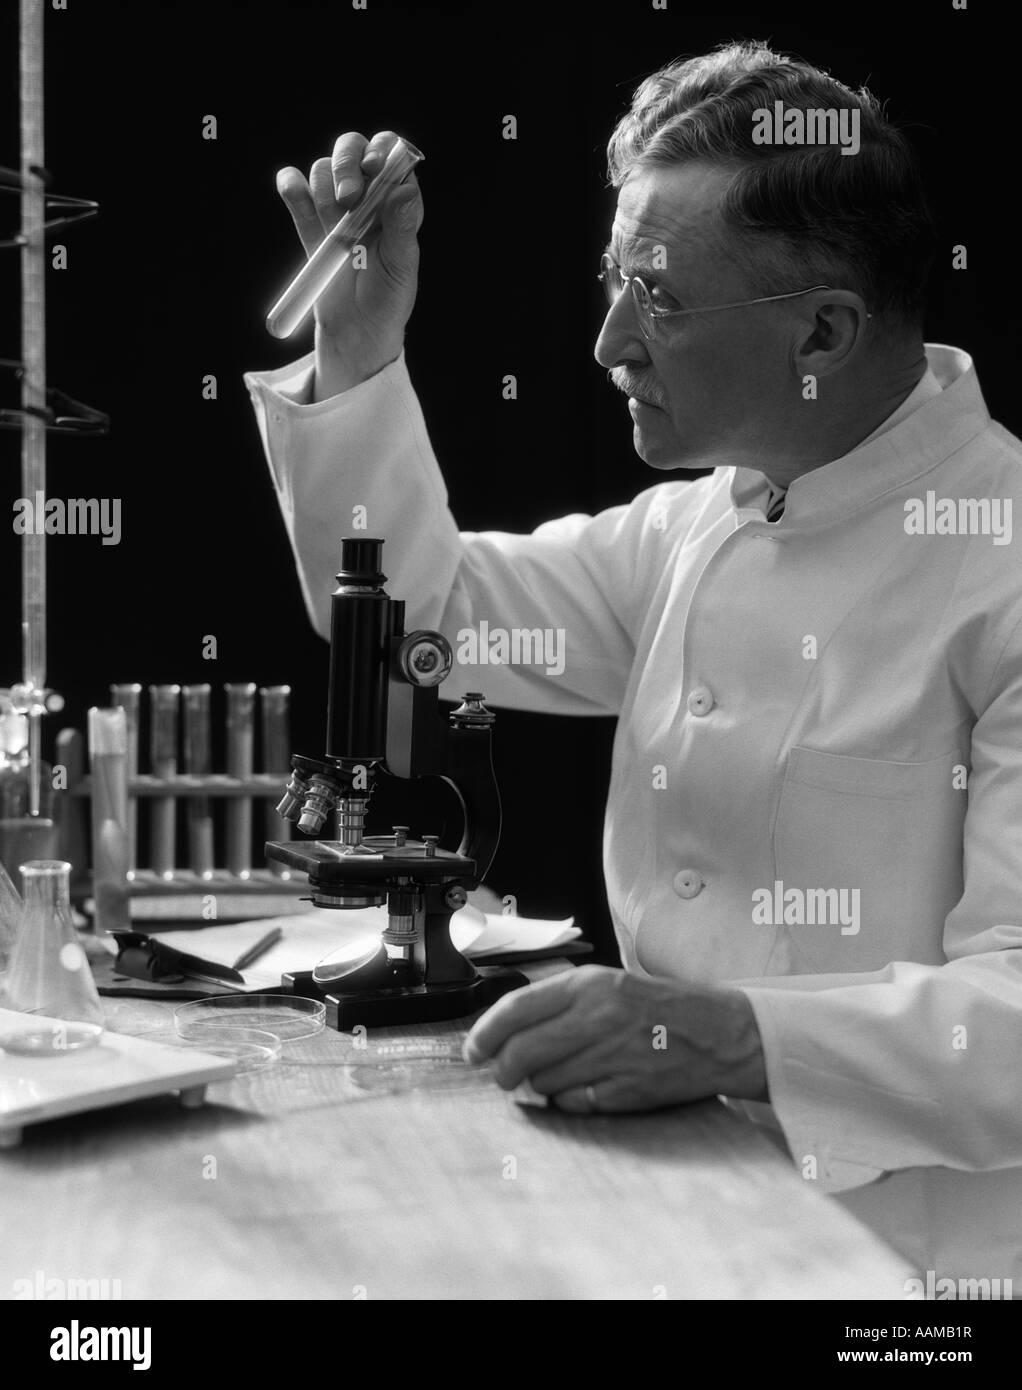 1920s 1930s 1940s SCIENTIST LAB TECHNICIAN IN WHITE COAT LOOKING AT TEST-TUBE IN FRONT OF MICROSCOPE Stock Photo